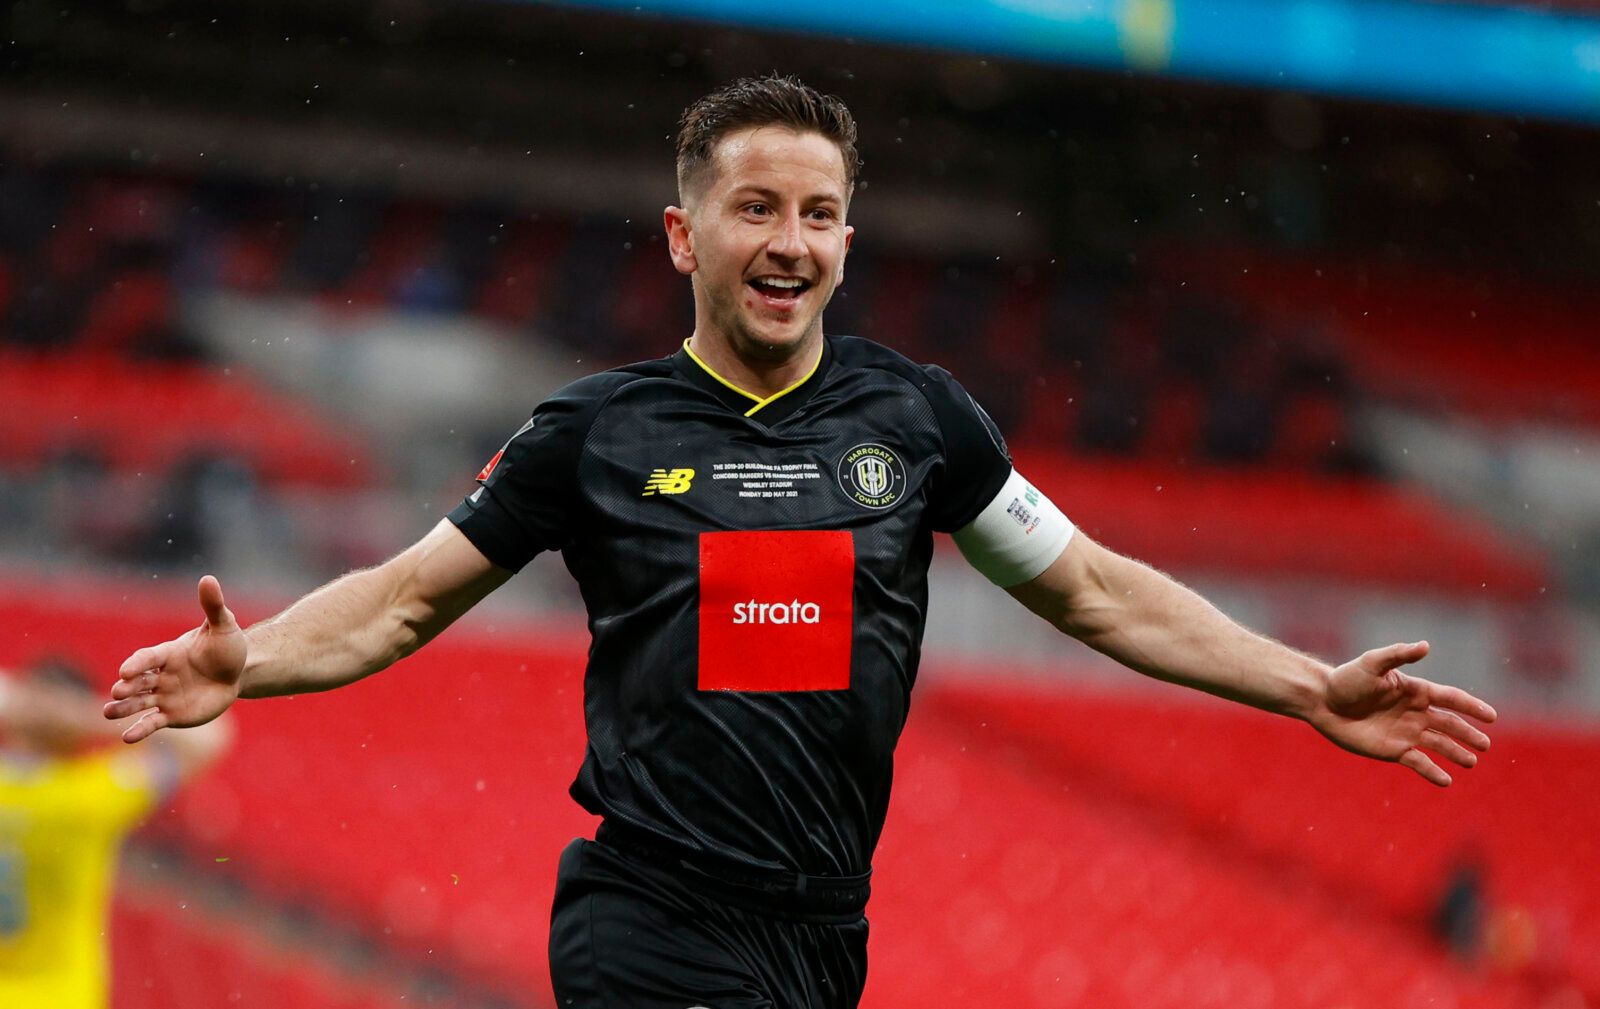 Soccer Football - 2019/20 FA Trophy Final - Concord Rangers v Harrogate Town - Wembley Stadium, London, Britain - May 3, 2021 Harrogate Town's Josh Falkingham celebrates scoring their first goal Action Images/John Sibley EDITORIAL USE ONLY. No use with unauthorized audio, video, data, fixture lists, club/league logos or 'live' services. Online in-match use limited to 75 images, no video emulation. No use in betting, games or single club /league/player publications.  Please contact your account r